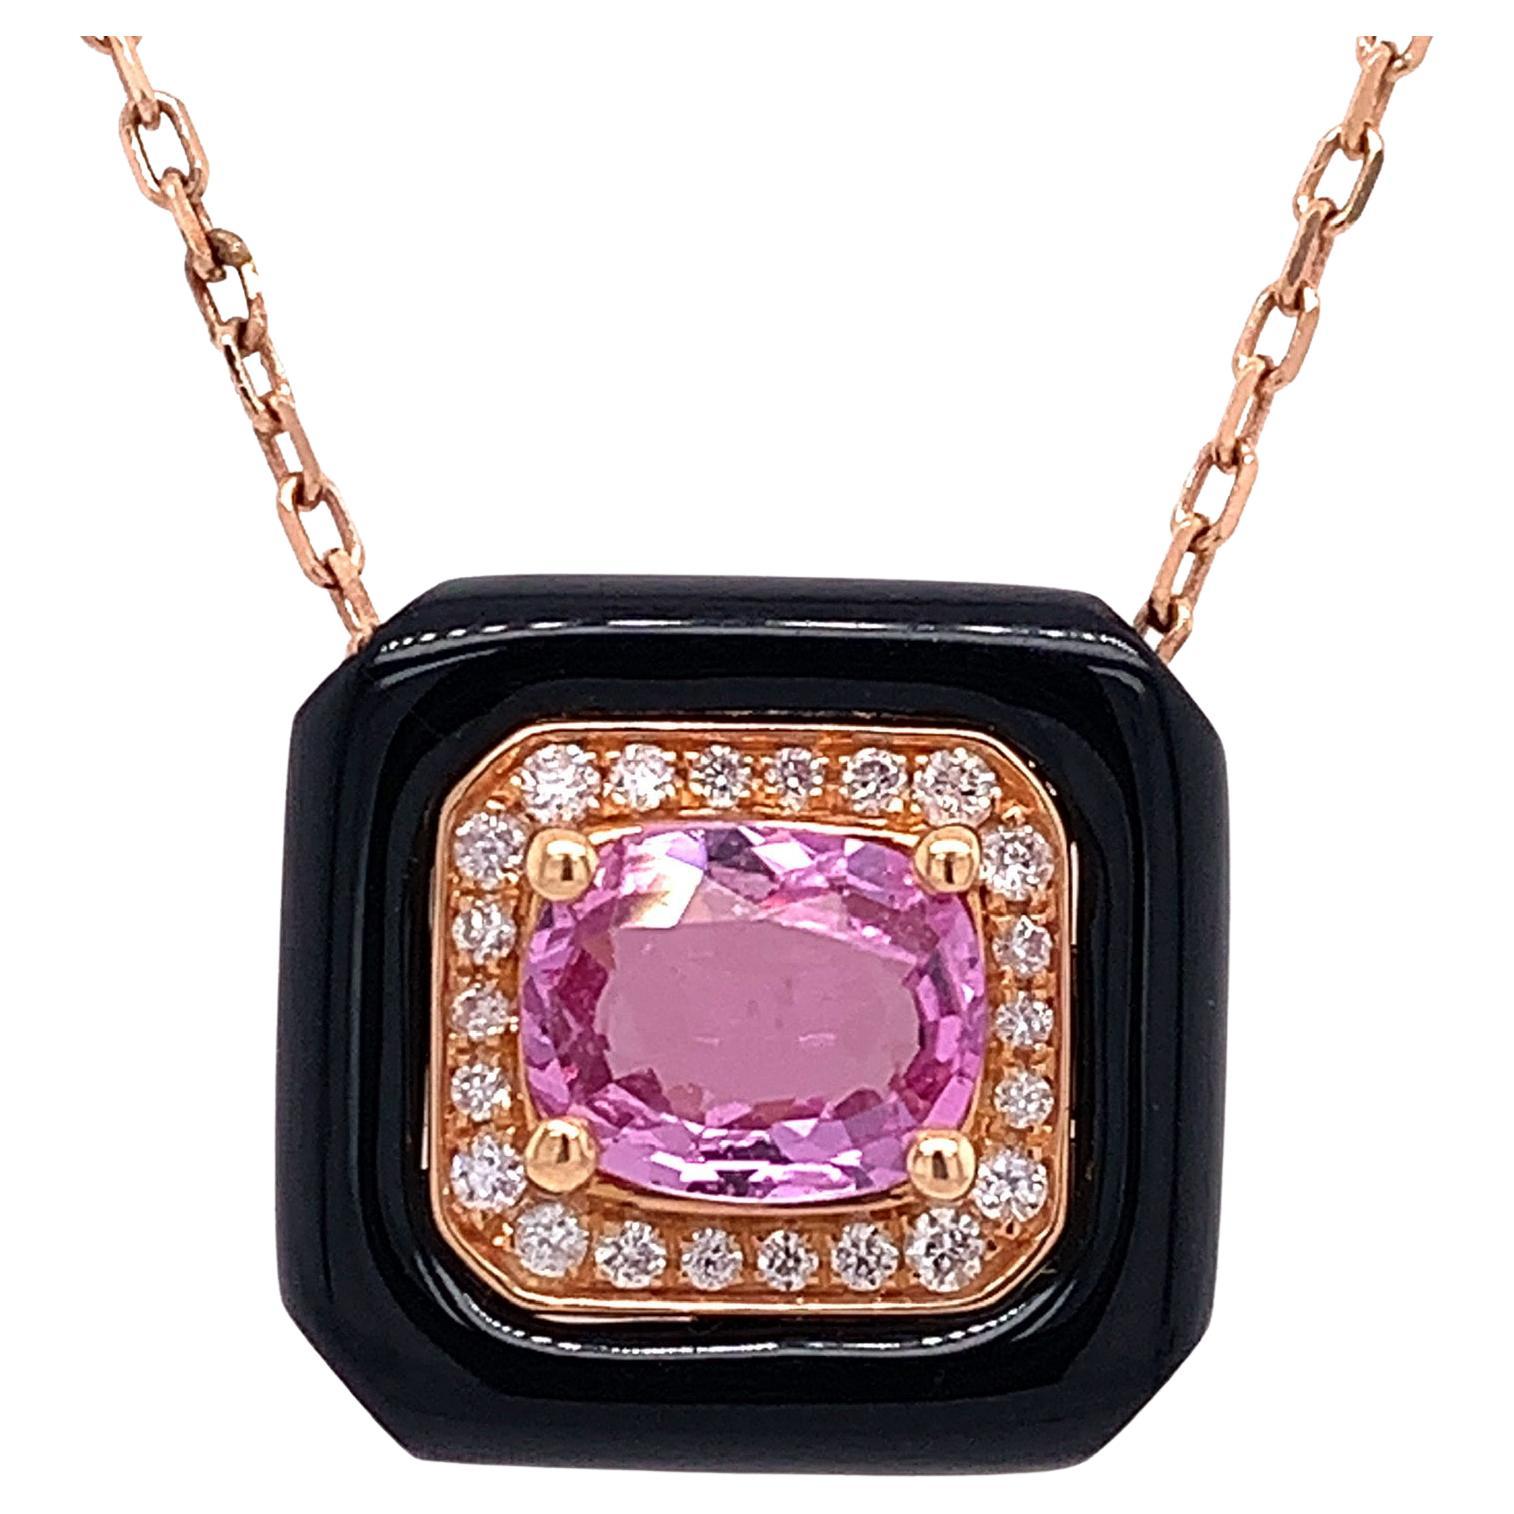 18K Rose Gold
Black Agate: 1.71 Cts
Pink Sapphire: 0.68 Cts
Diamonds: 0.12 Cts